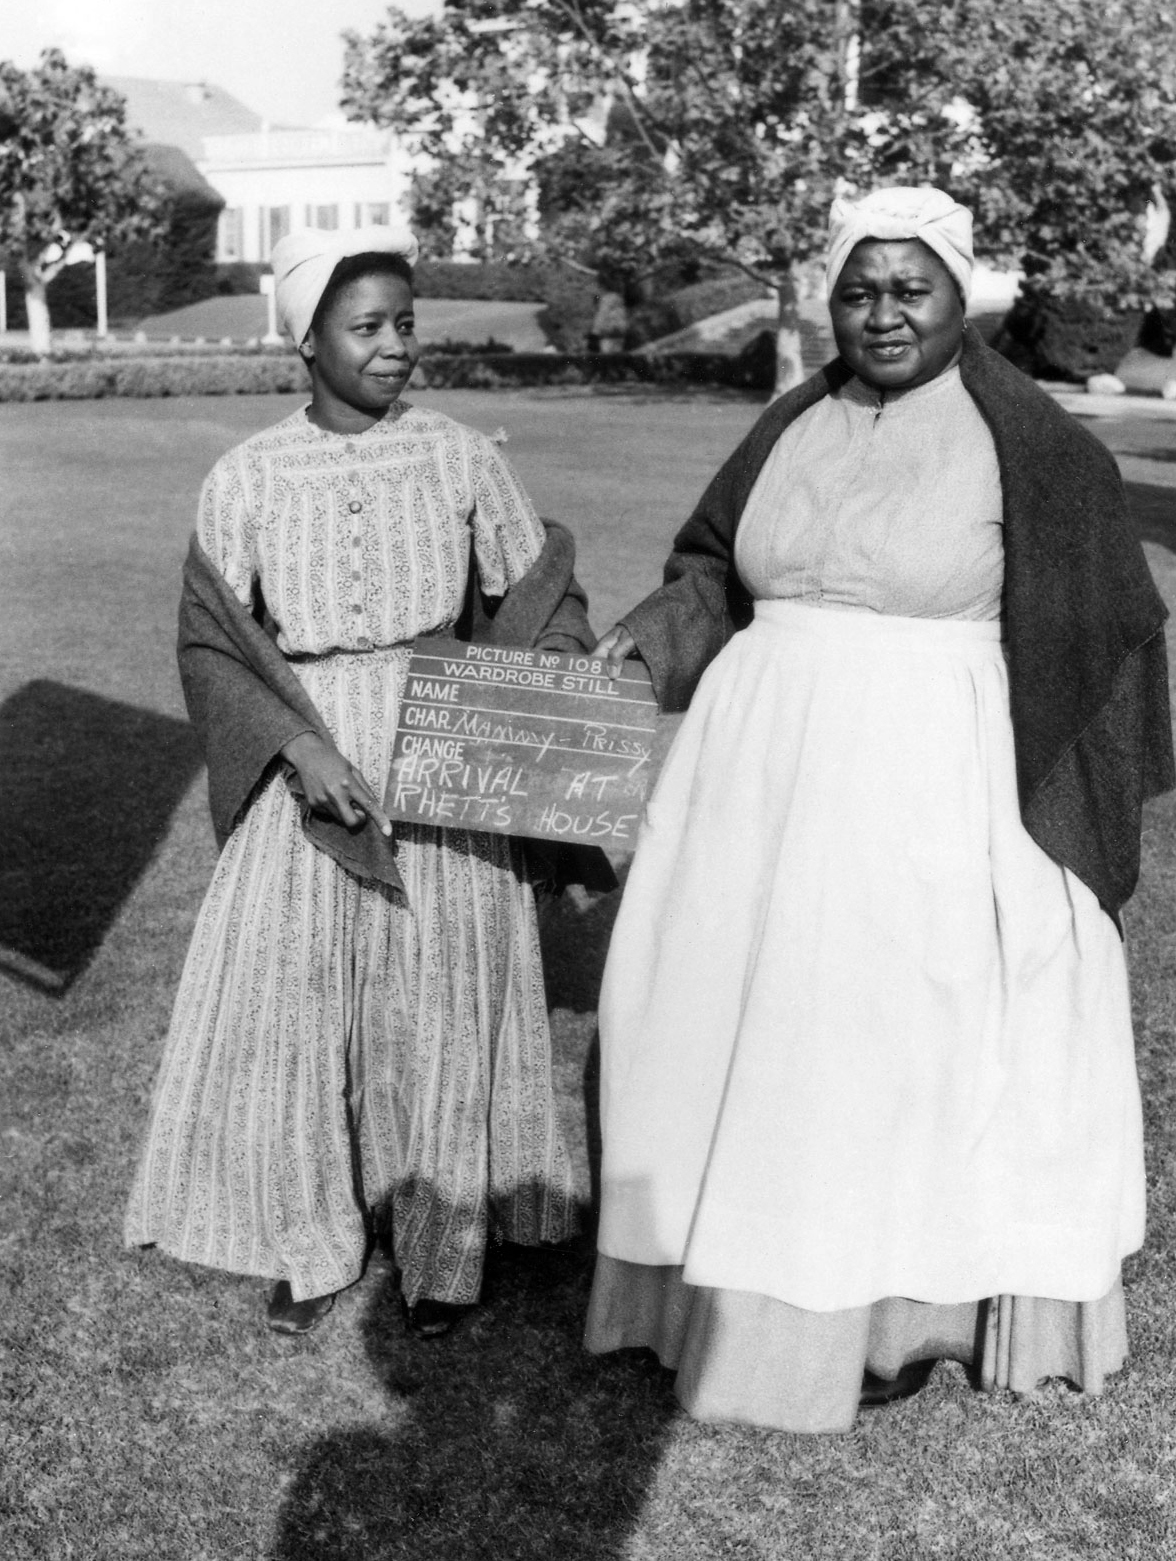 Hattie McDaniel, right, as Mammy, on the set of Gone with the Wind in 1939.